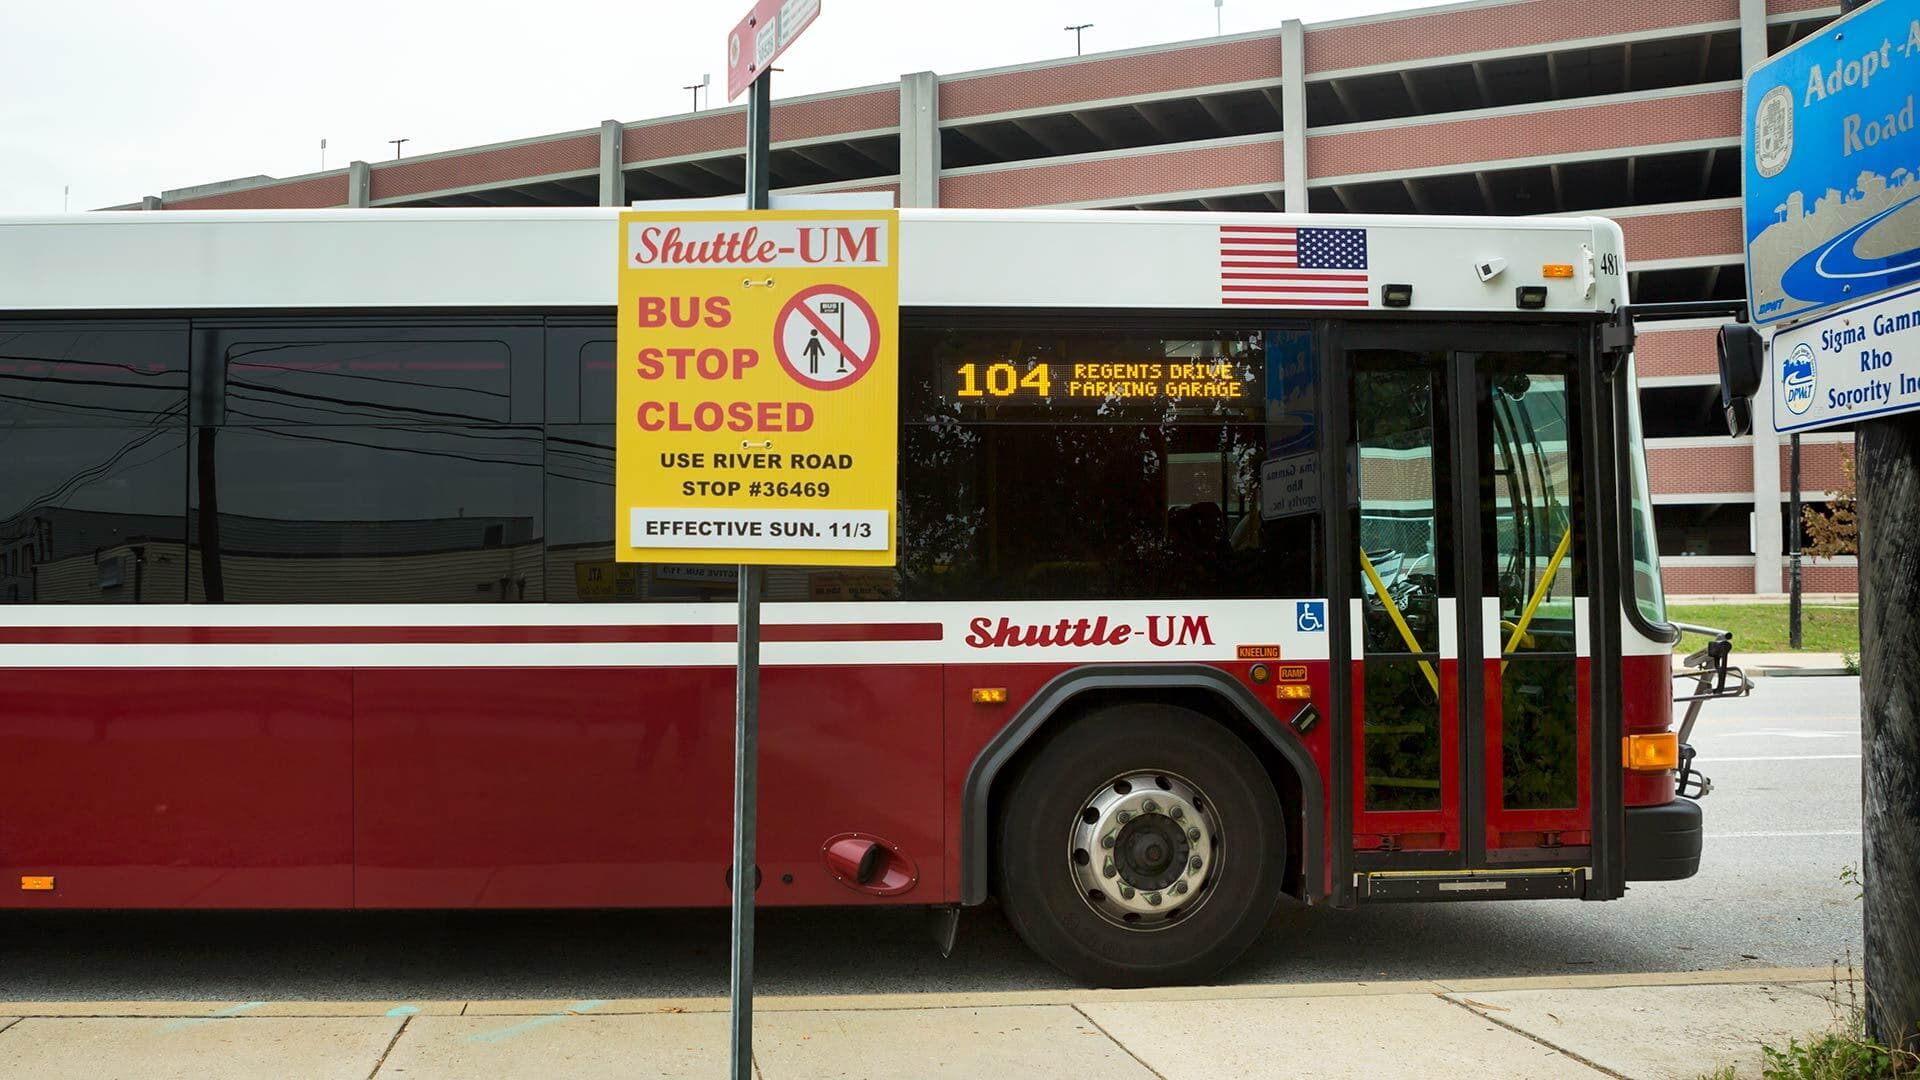 Yellow Shuttle-UM sign reading "Bus Stop Closed, Use River Road Stop #36469"